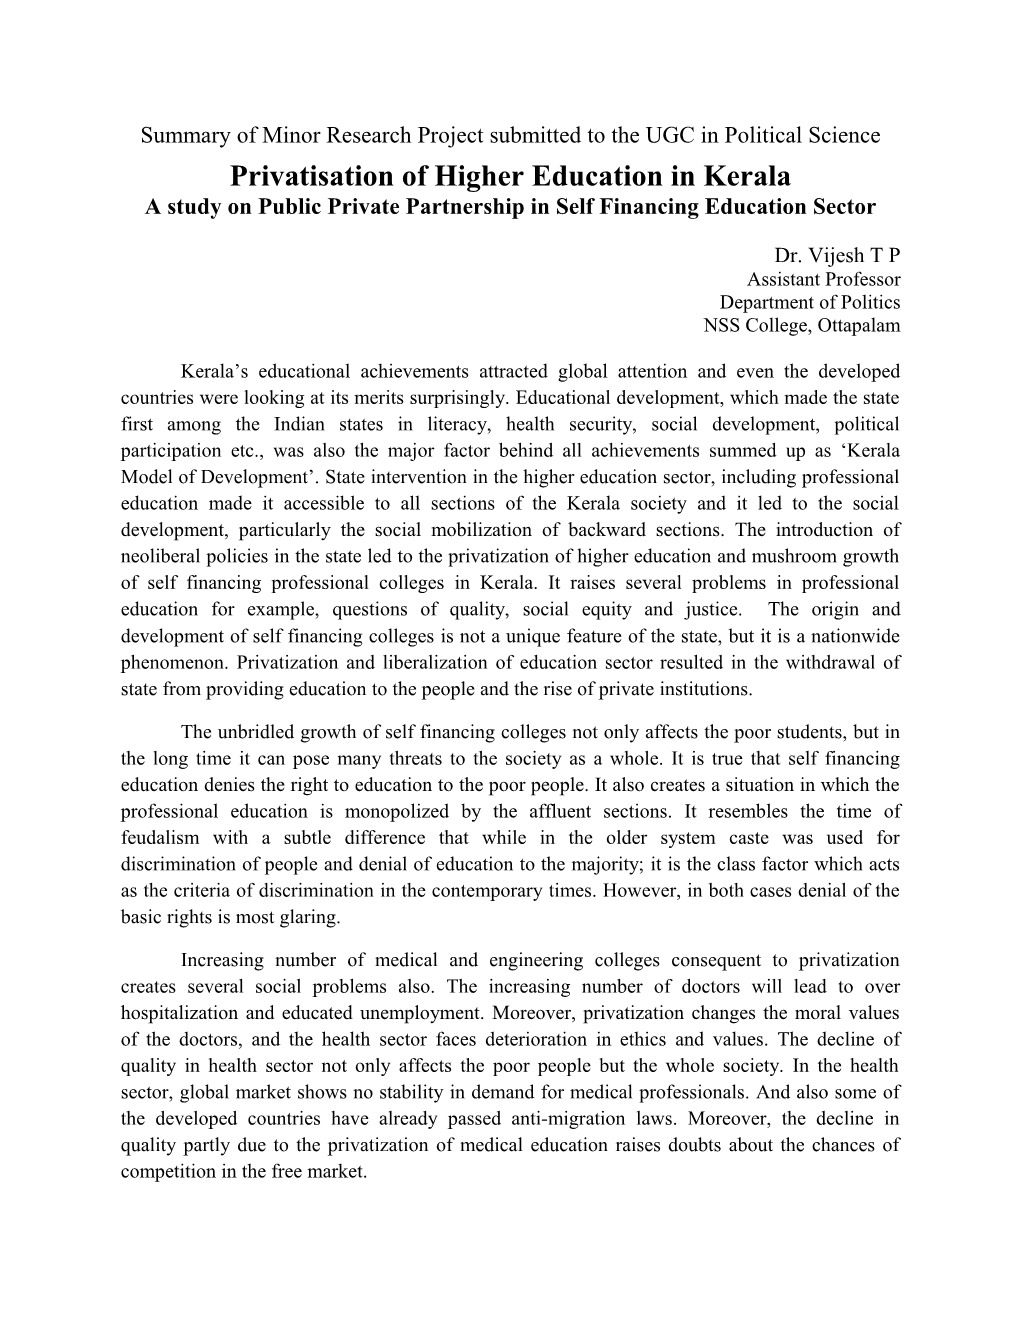 Privatisation of Higher Education in Kerala